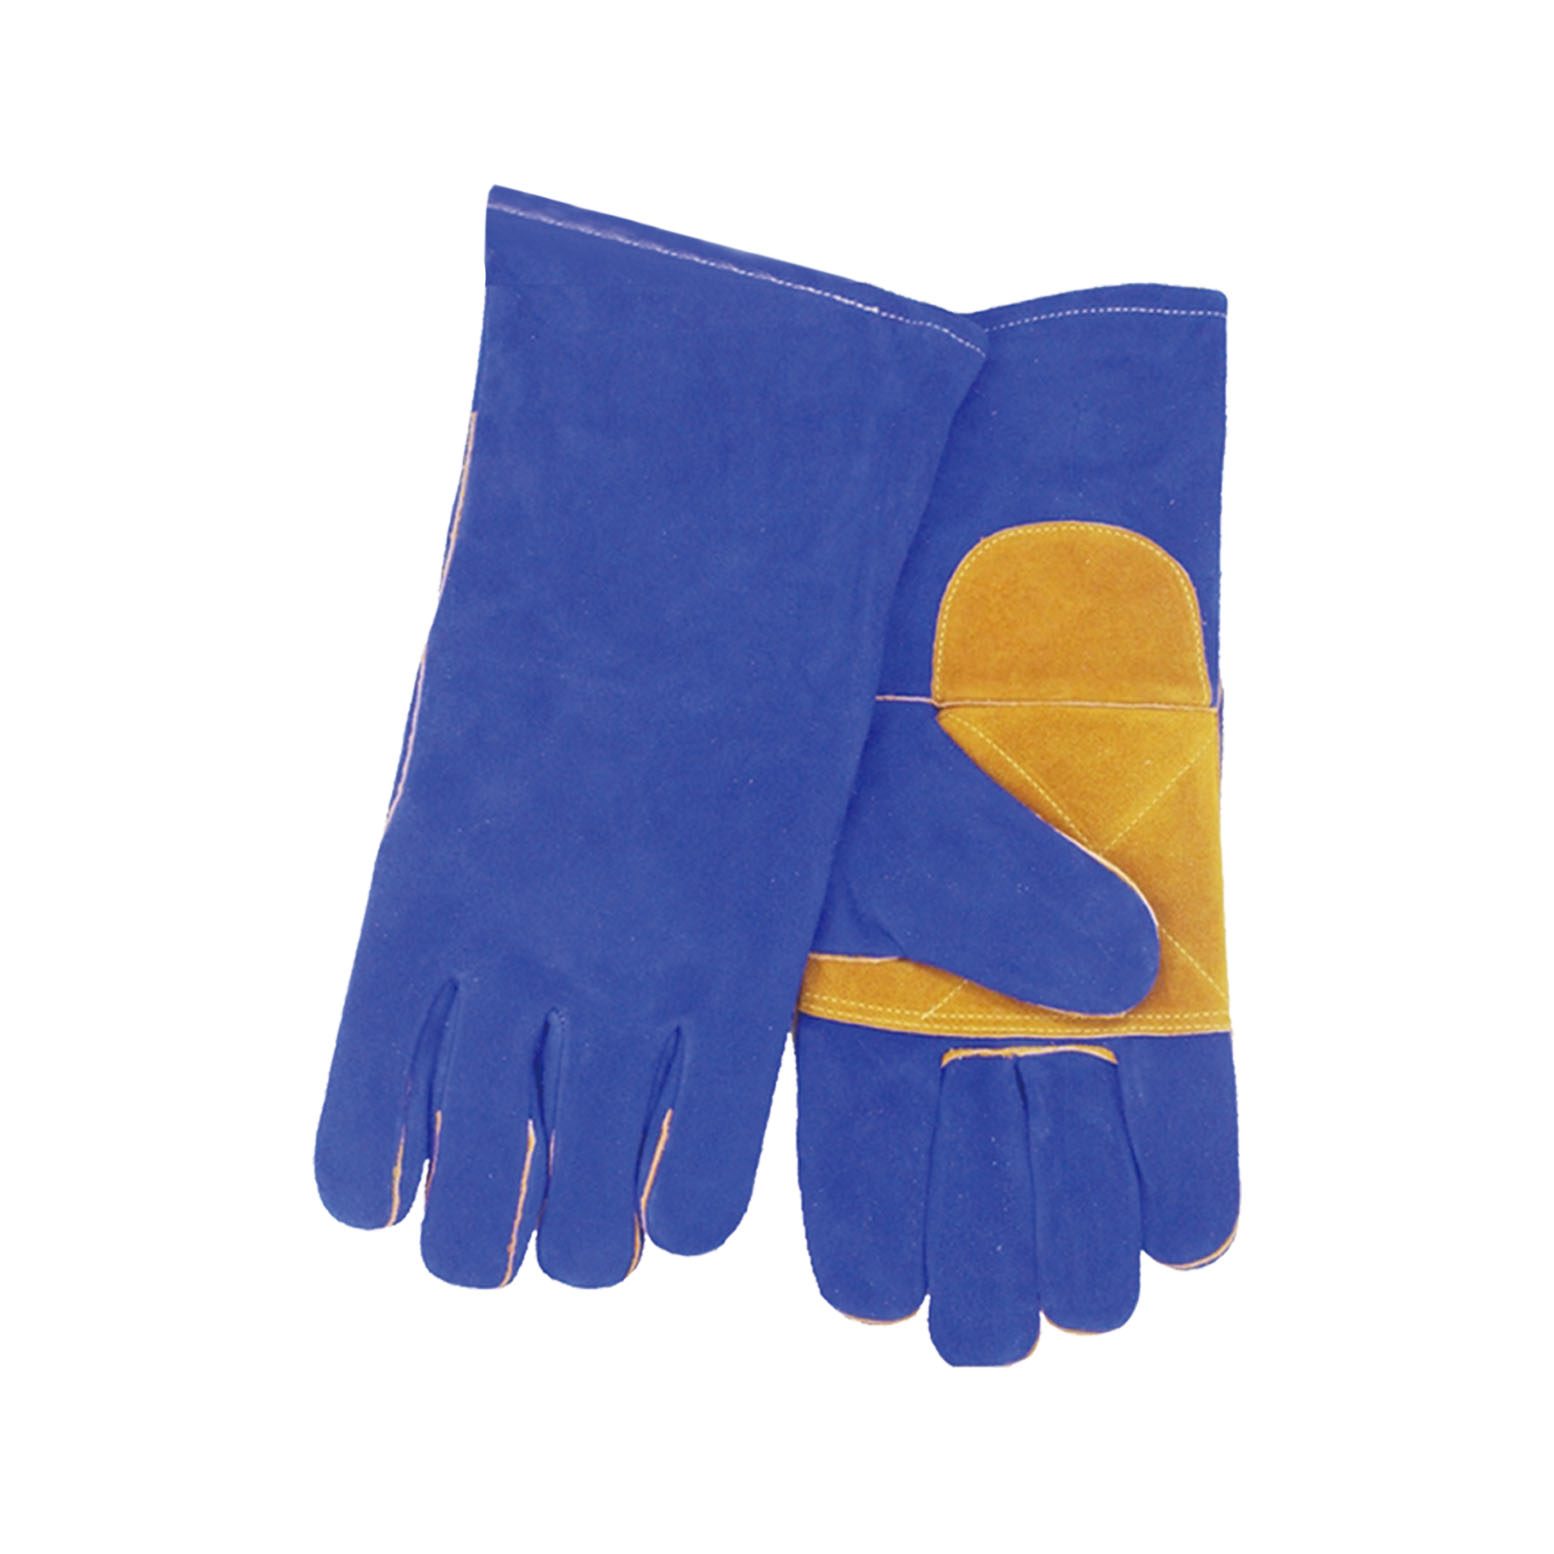 Double-layer leather welding gloves